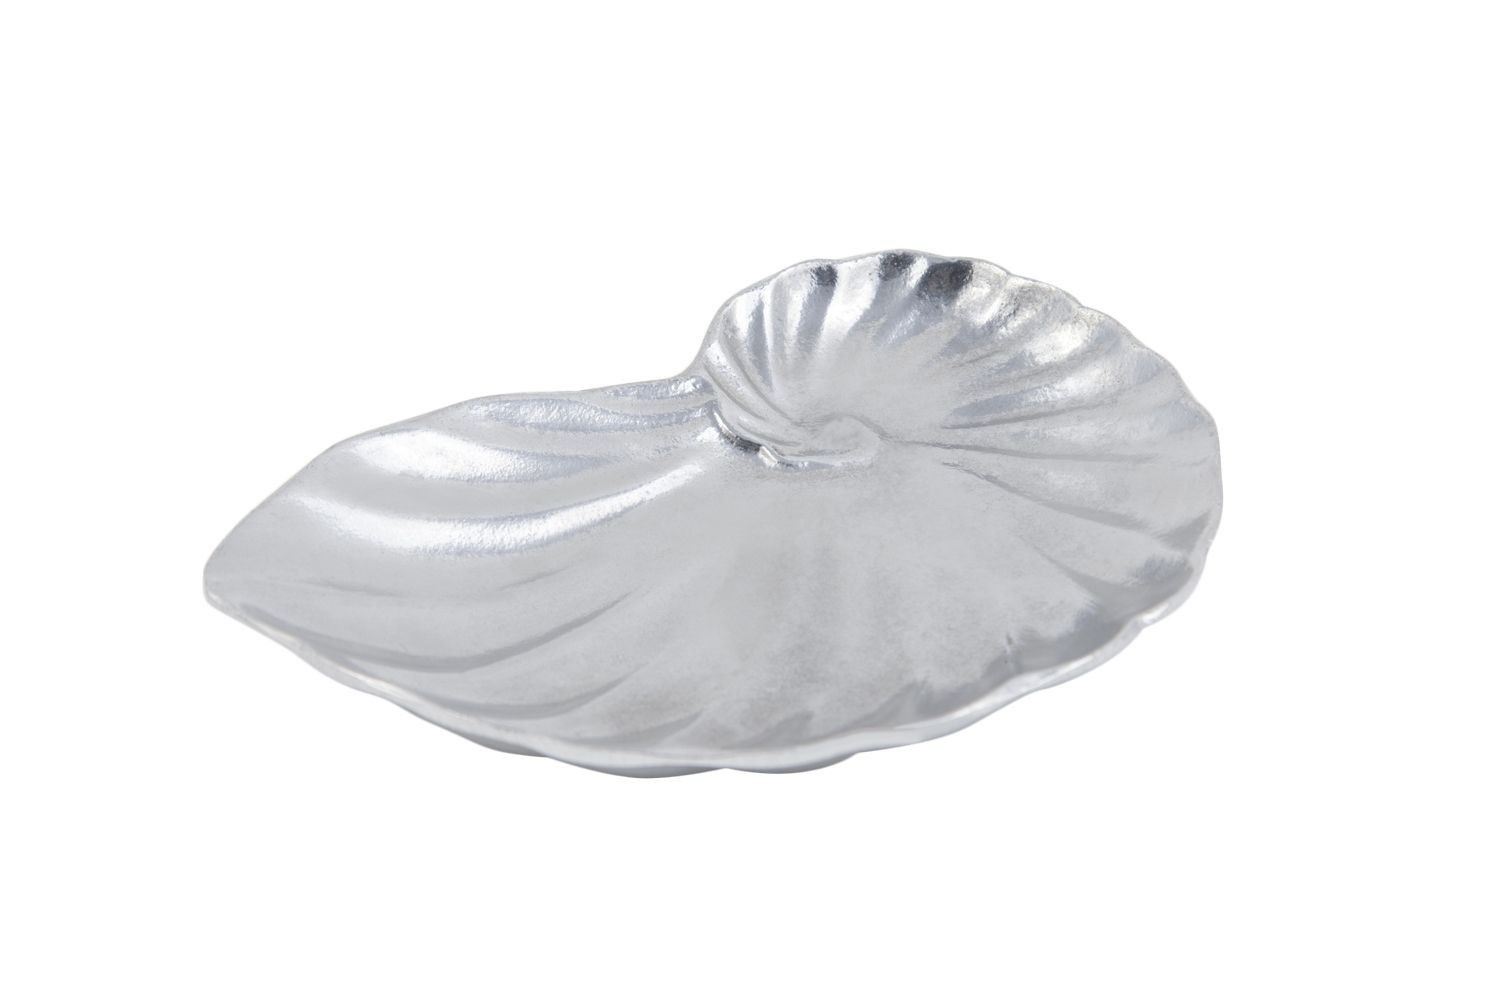 Bon Chef 5078P Side Serving Shell, Pewter Glo 6 1/4" Dia., Set of 12